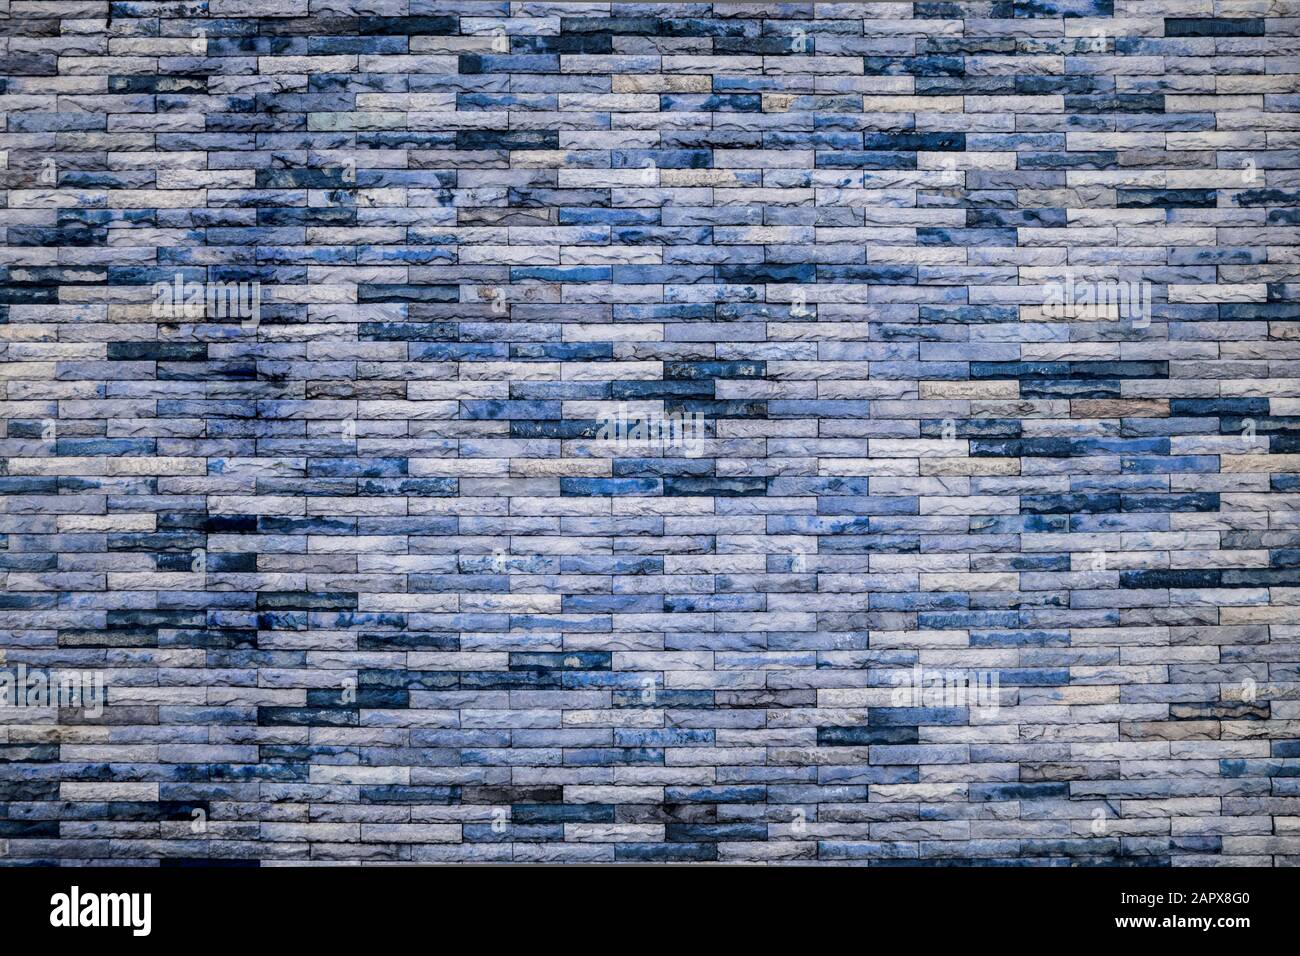 Abstract Ocean Blue Color Brick Wall Patterns as Background or Textures Stock Photo